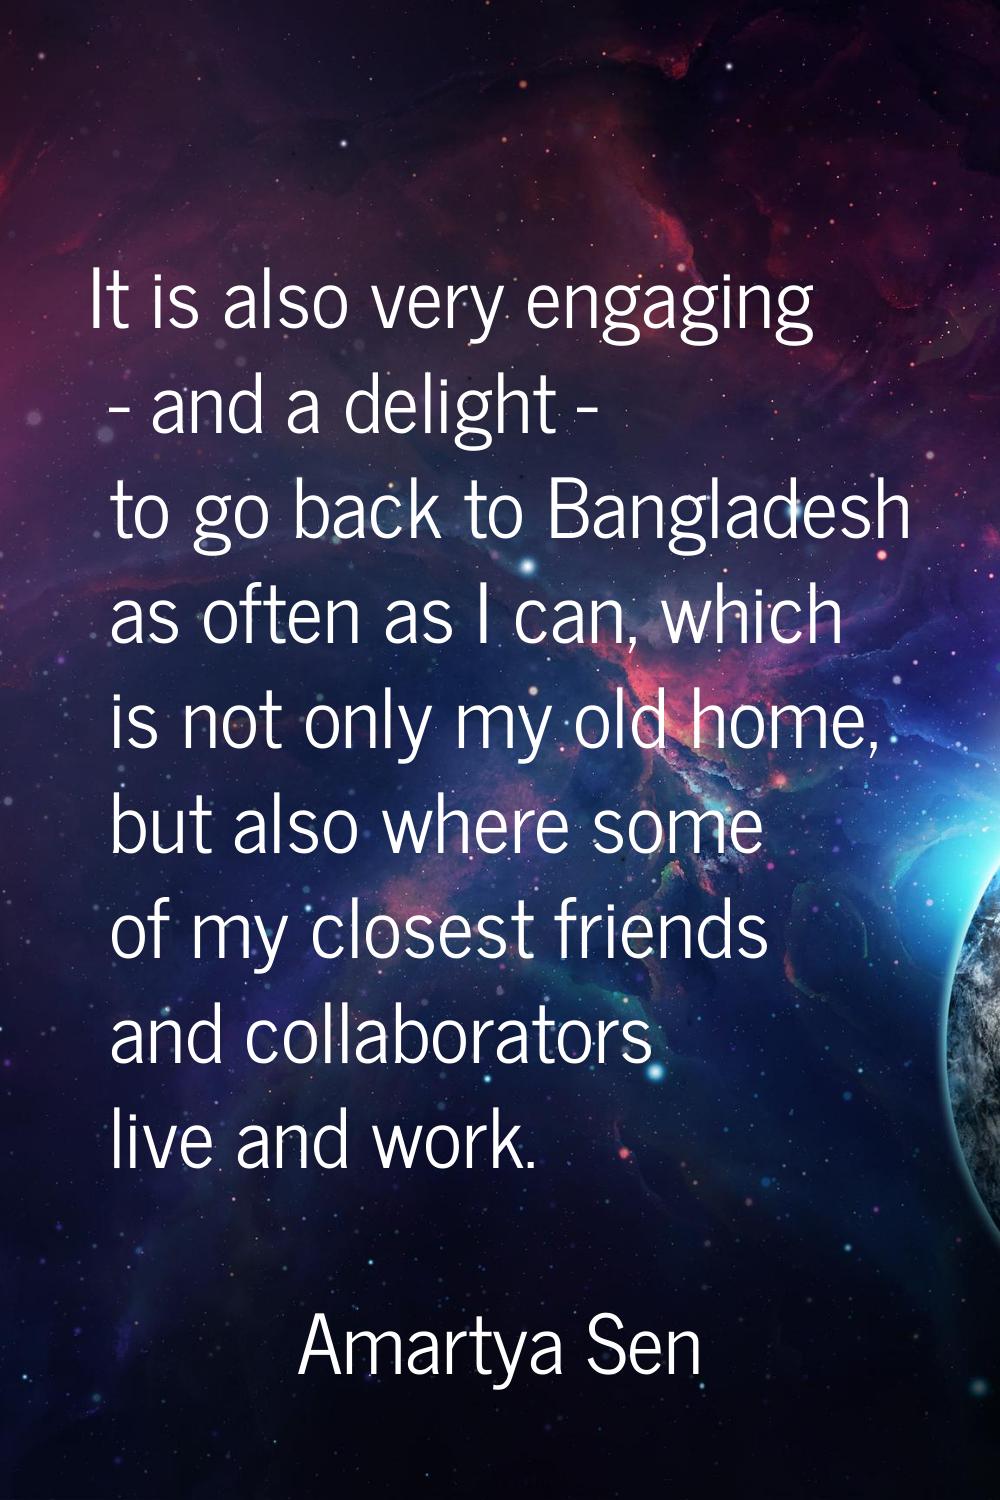 It is also very engaging - and a delight - to go back to Bangladesh as often as I can, which is not